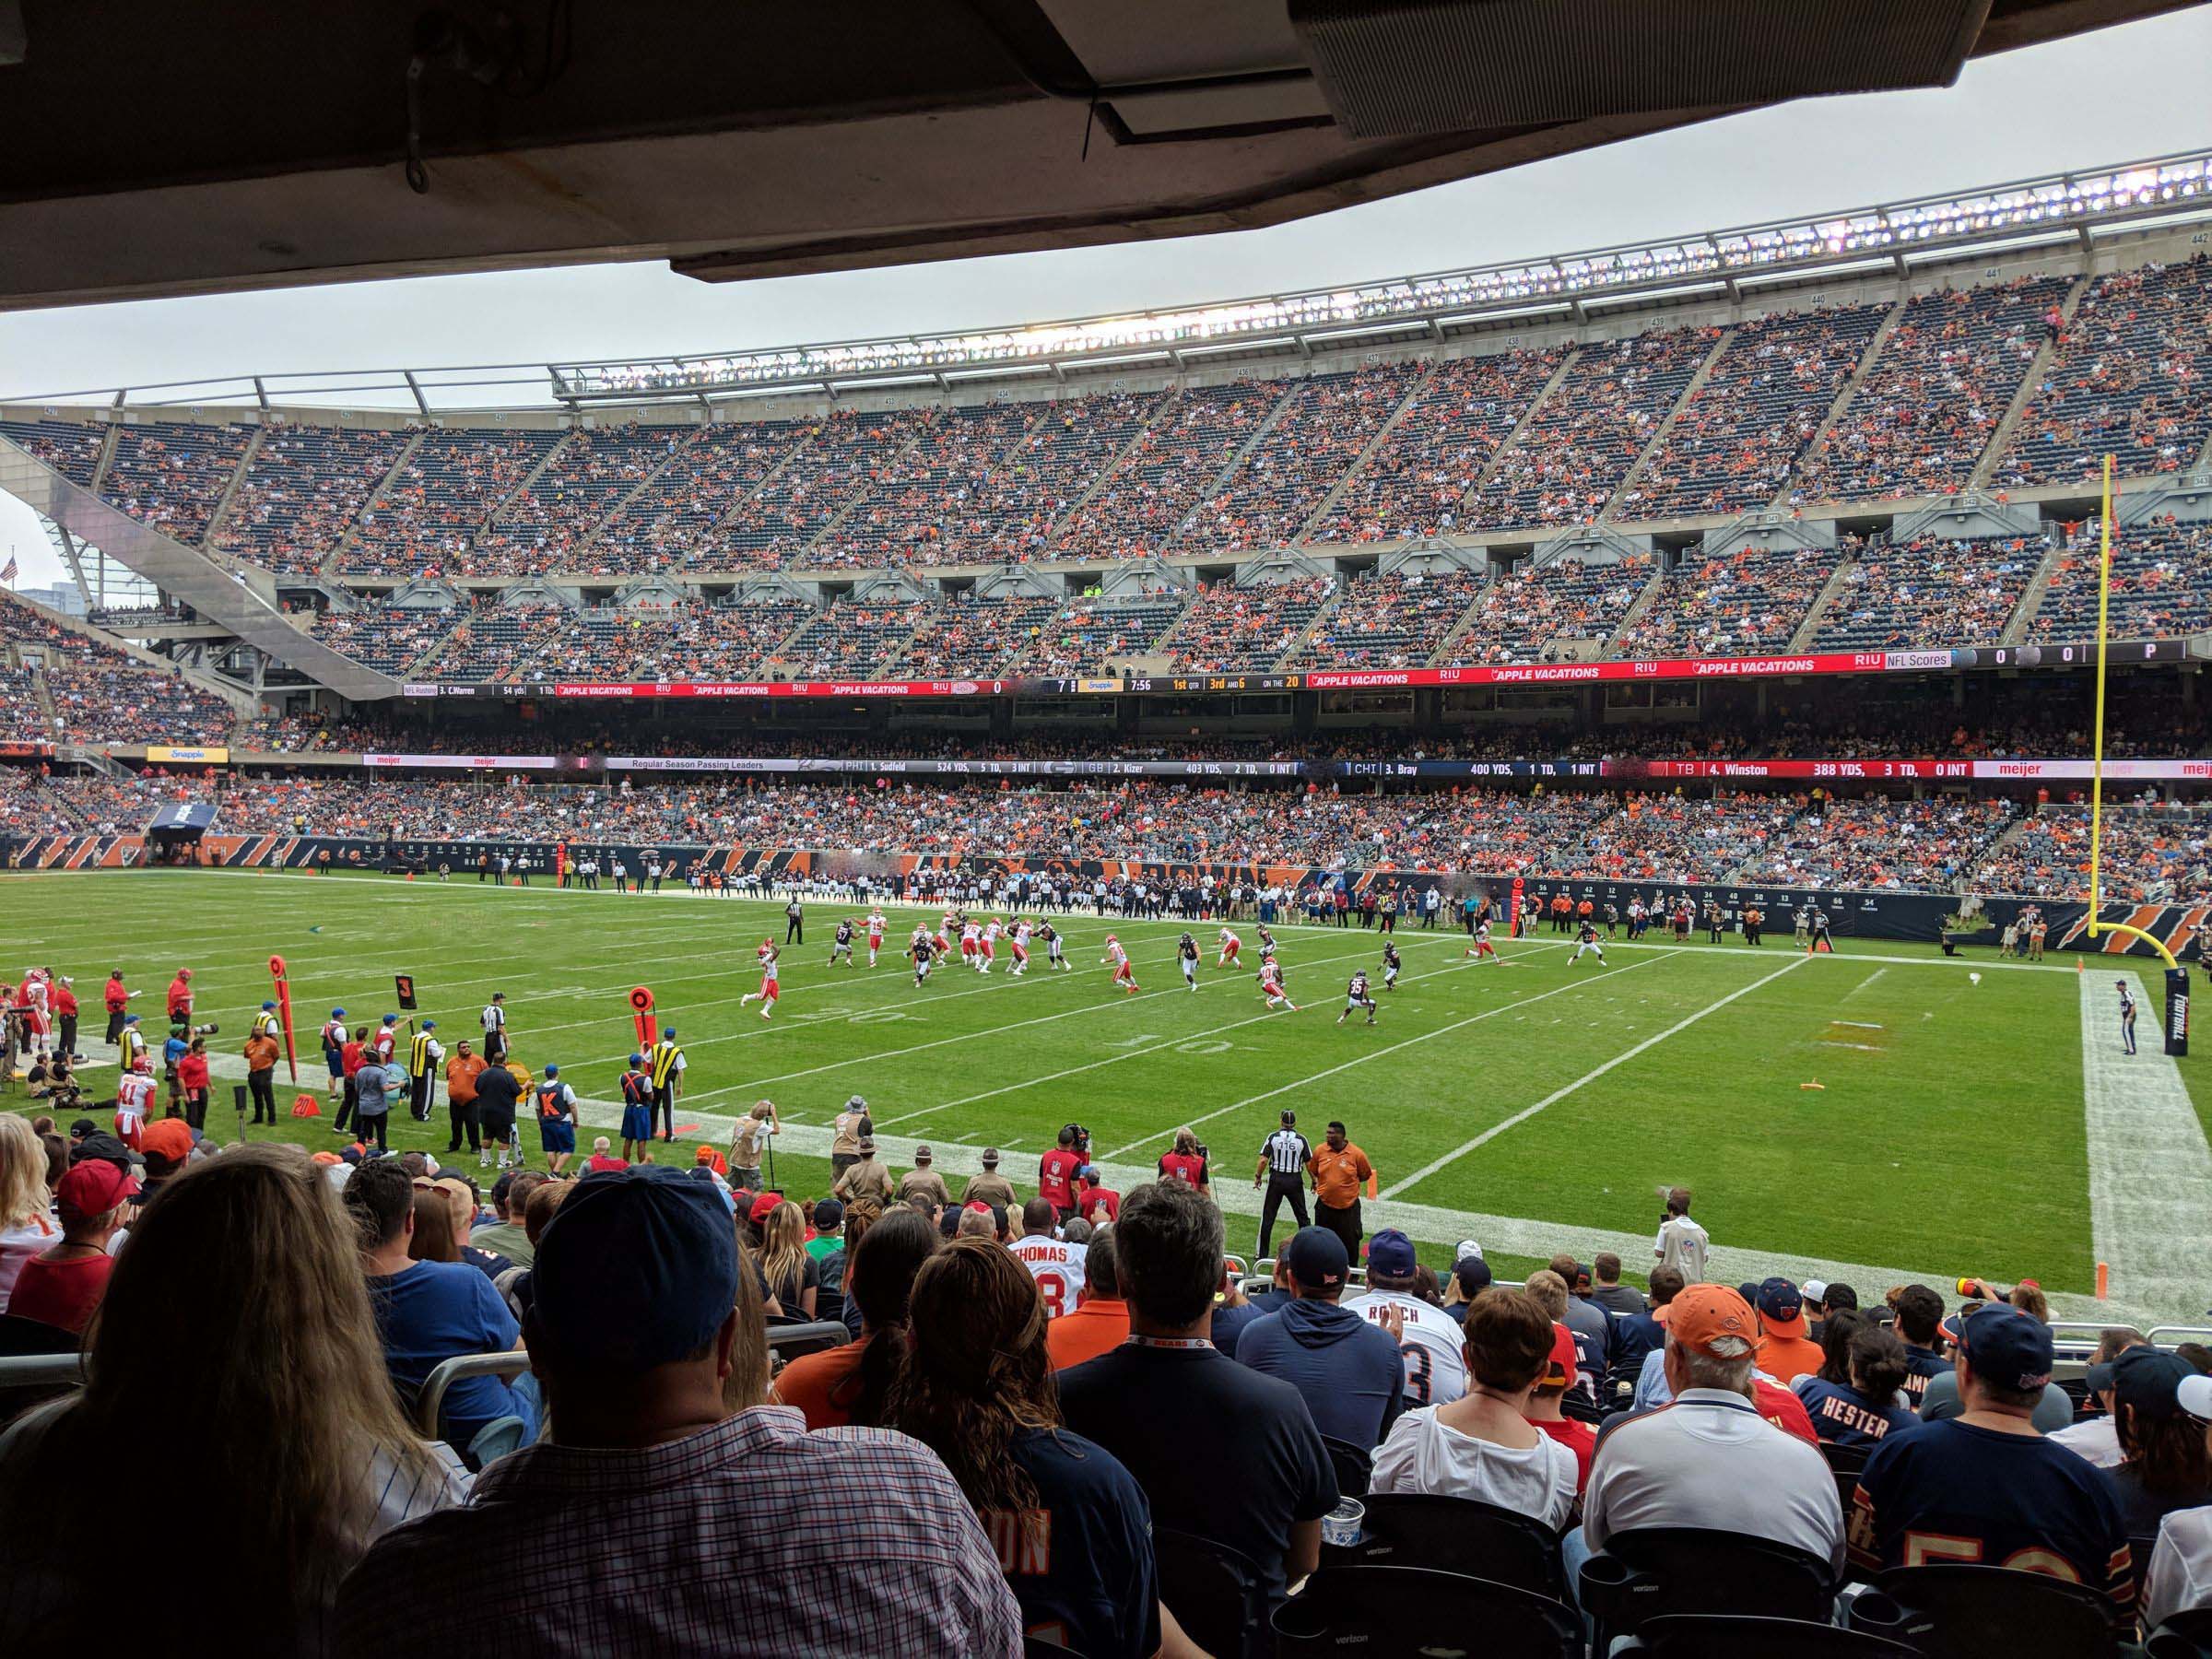 section 103, row 16 seat view  for football - soldier field